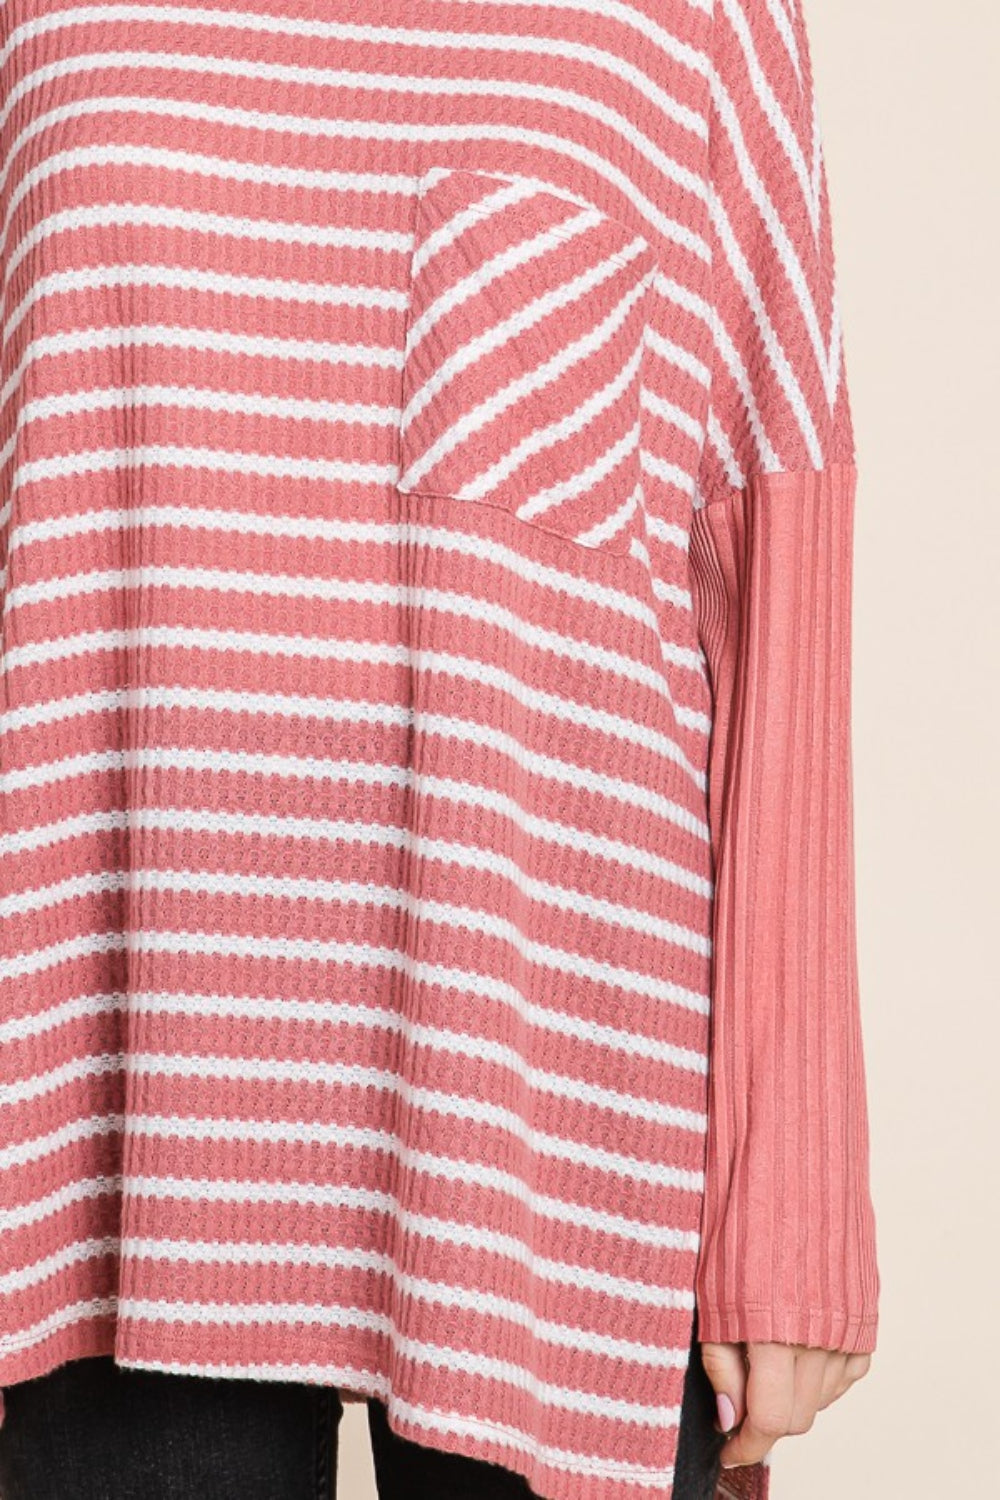 Oversized Striped Long Sleeve Tee with Side Slits